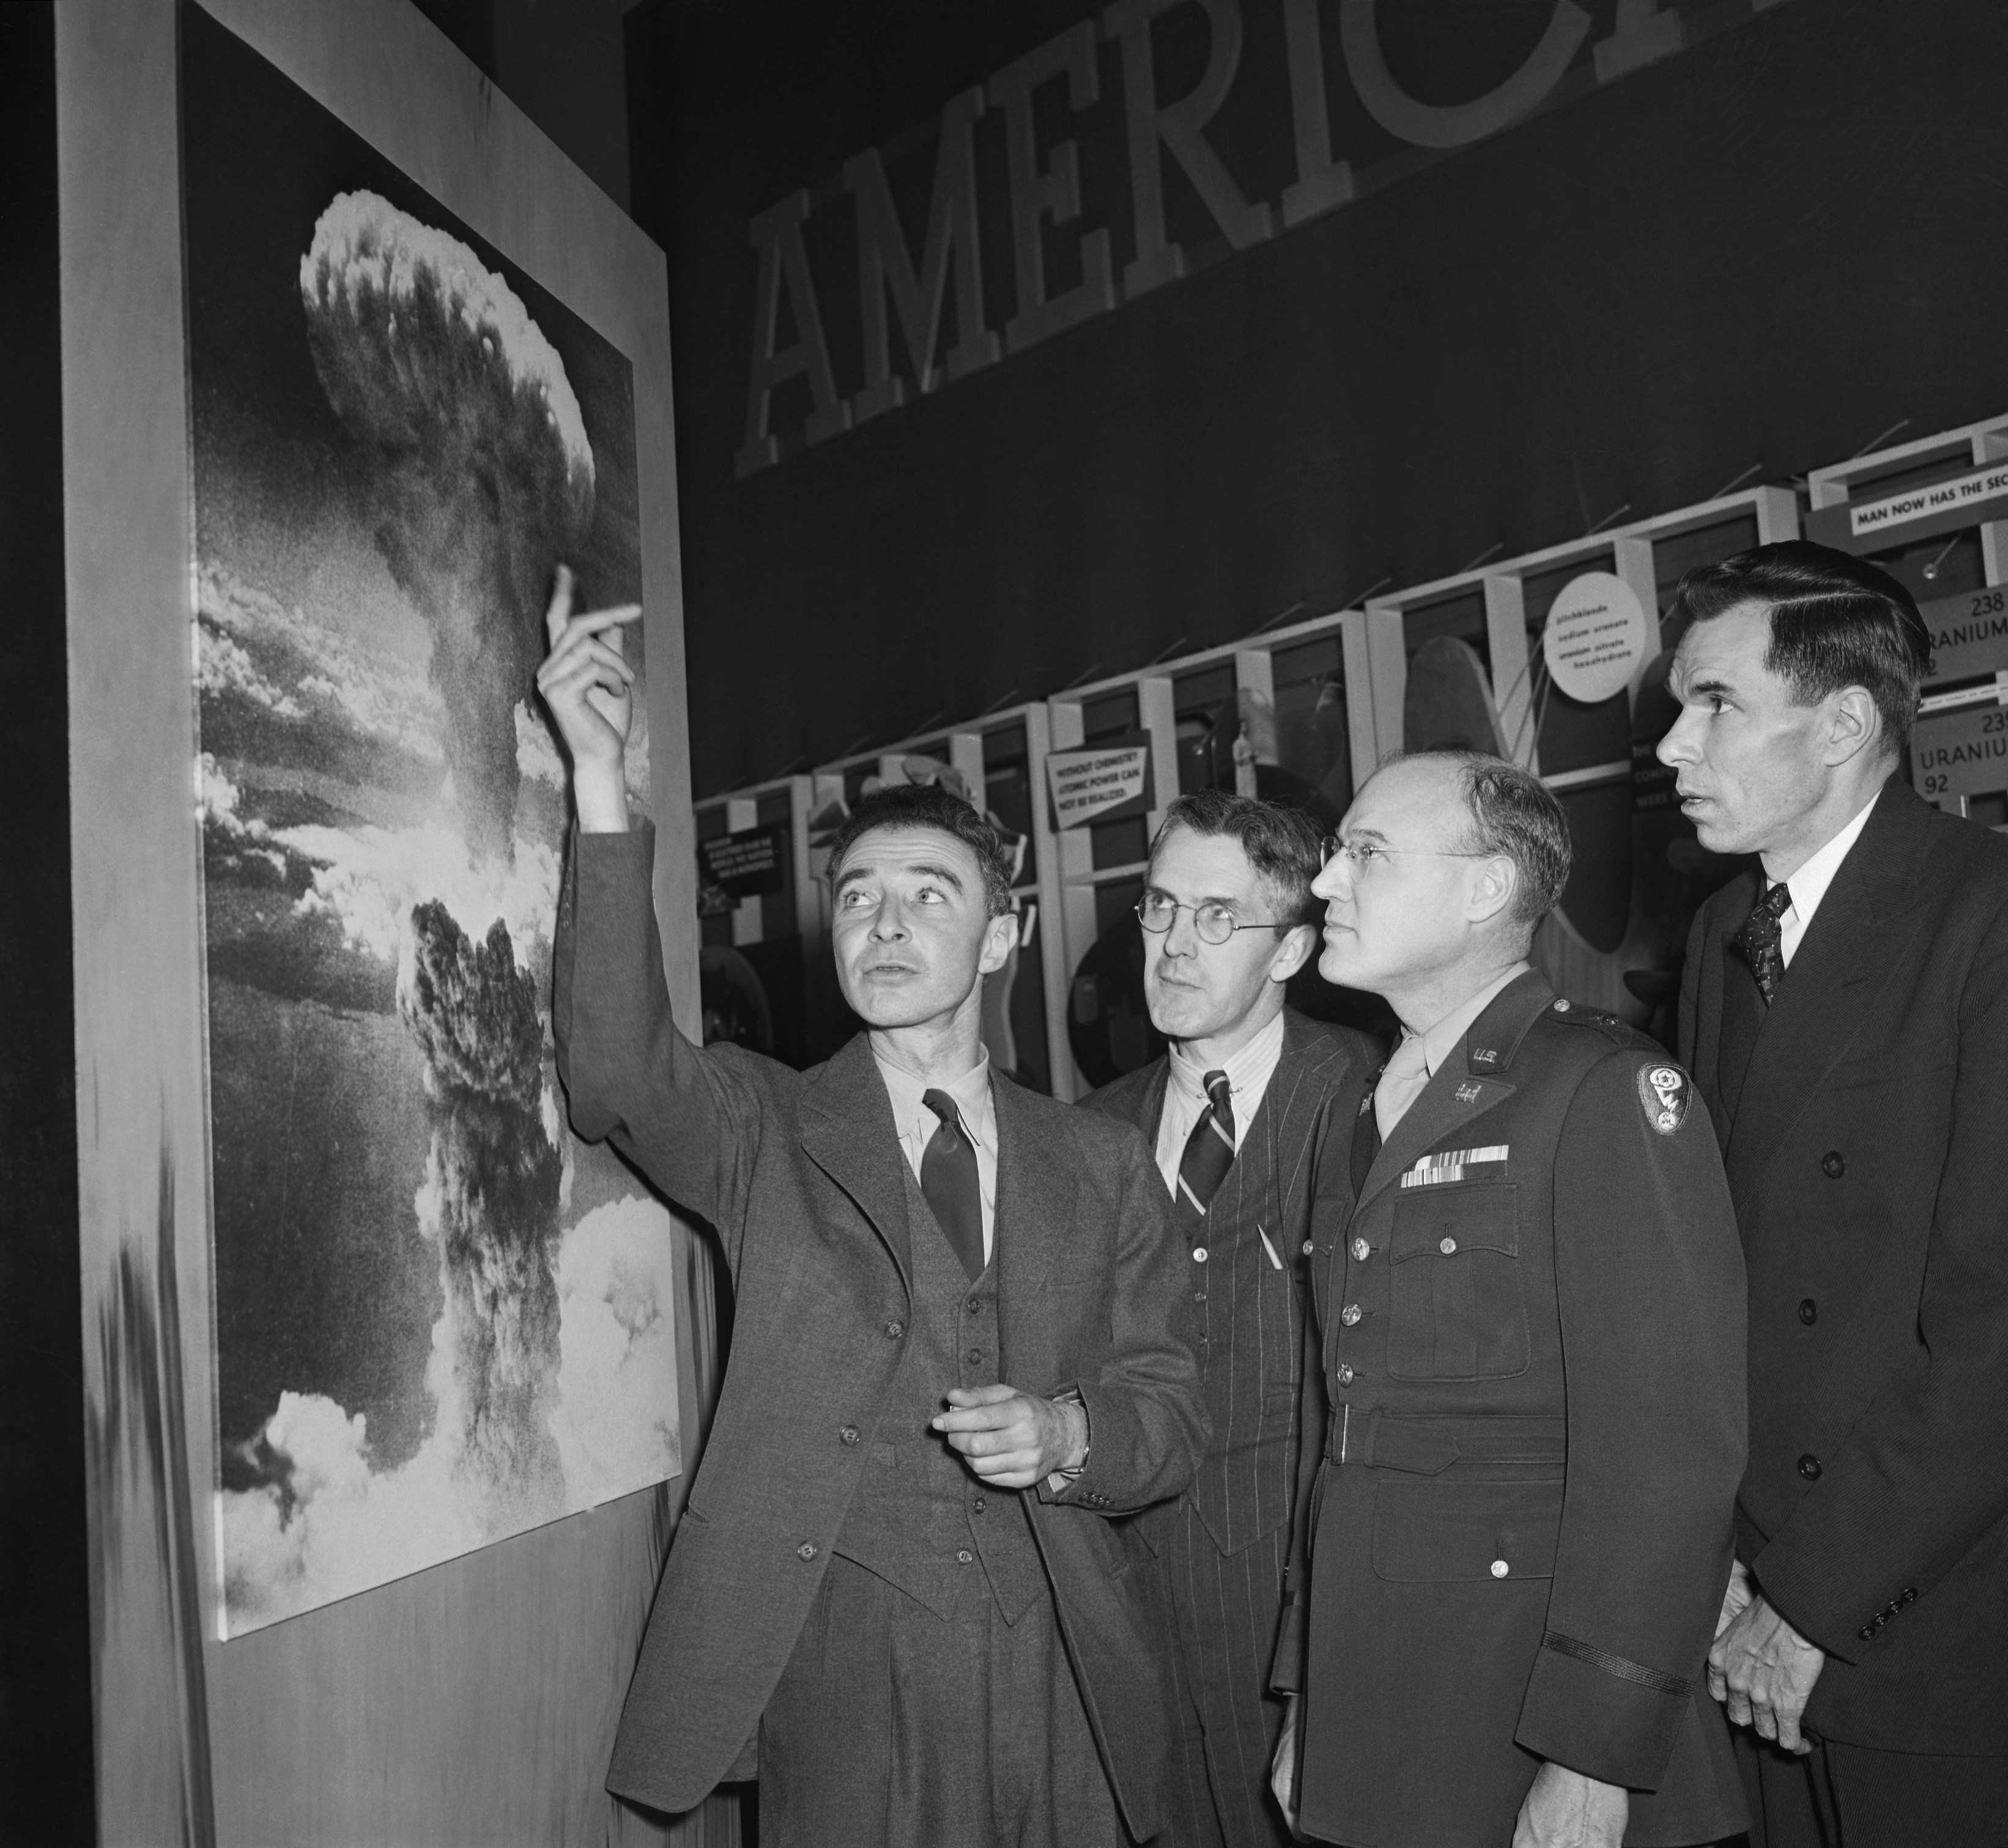 J. Robert Oppenheimer and America's Quest Build an Atomic Bomb